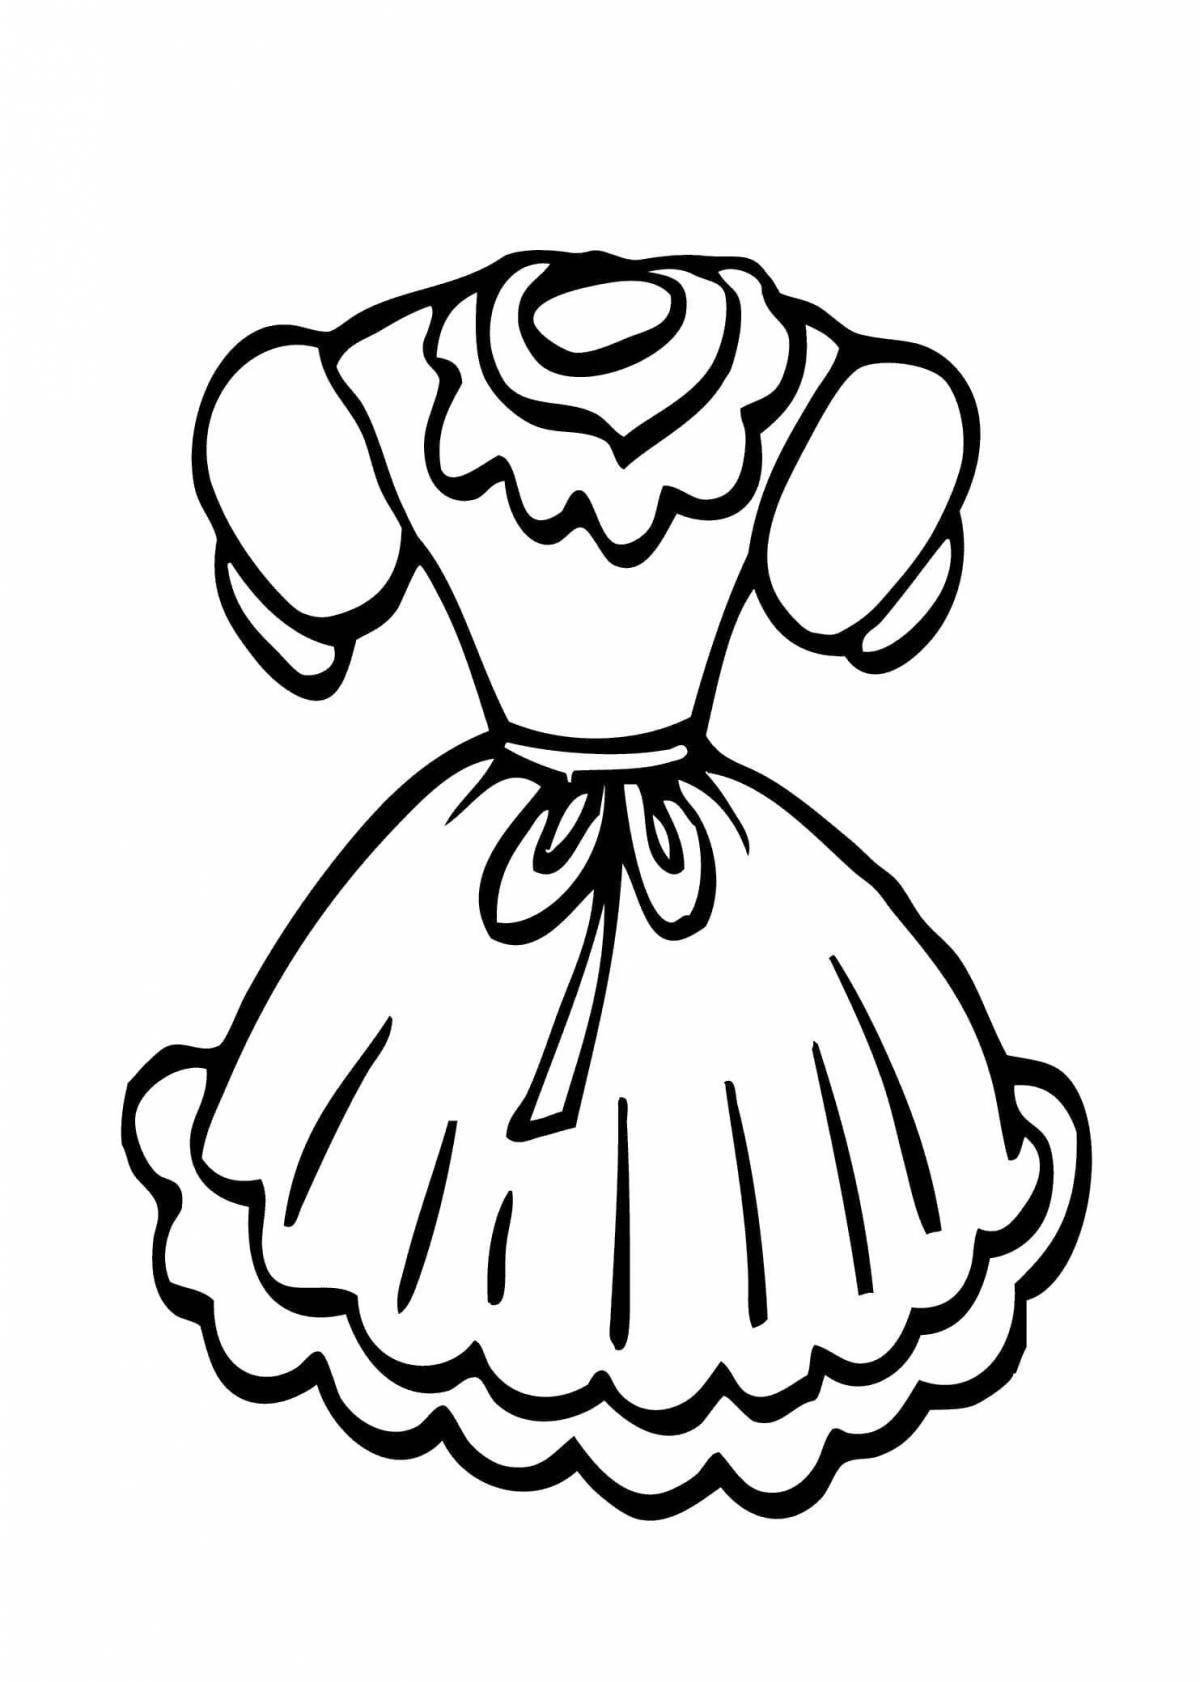 Fun dress coloring for children 5-6 years old